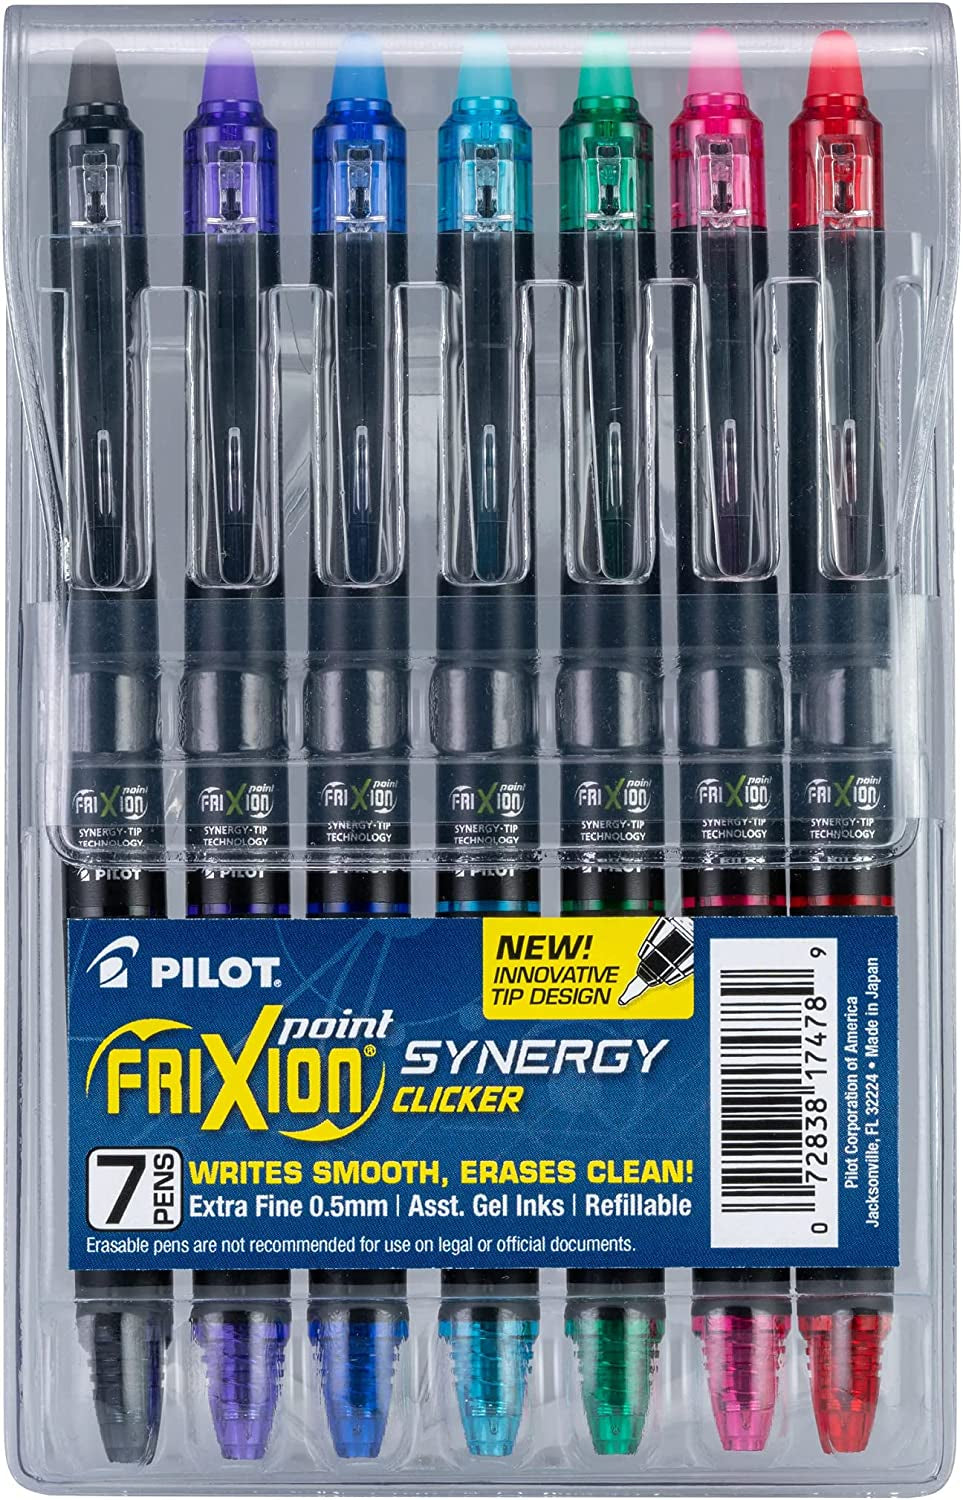 Frixion Synergy Clicker Erasable, Refillable & Retractable Gel Ink Pens, Extra Fine Point, Assorted Ink Colors, 5-Pack (18244)